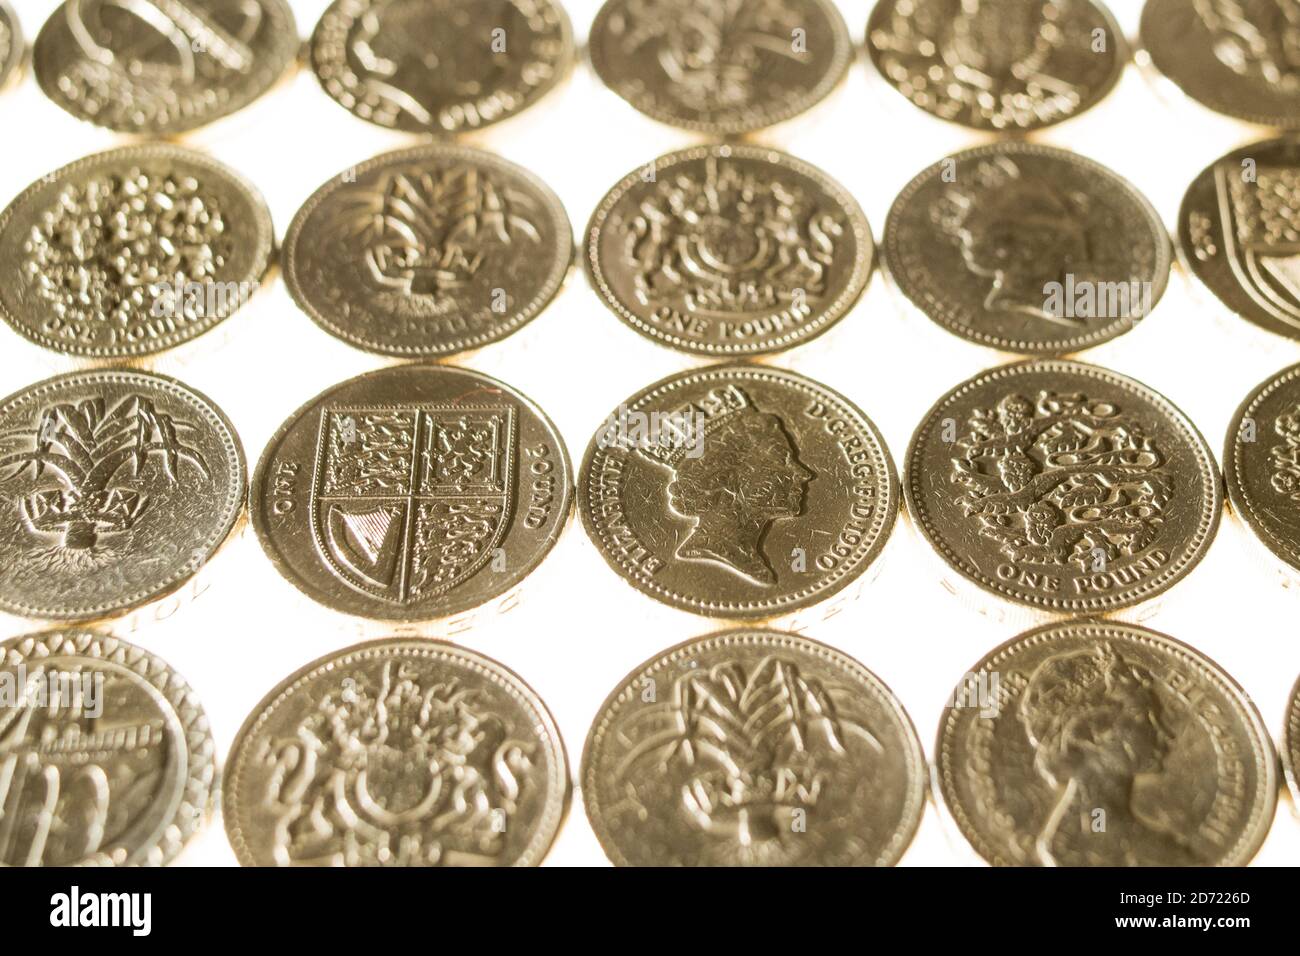 A selection of one pound coins, as the pound continues to be weak against the dollar and Euro, after dropping to a 30-year low after the Brexit Referendum. Stock Photo